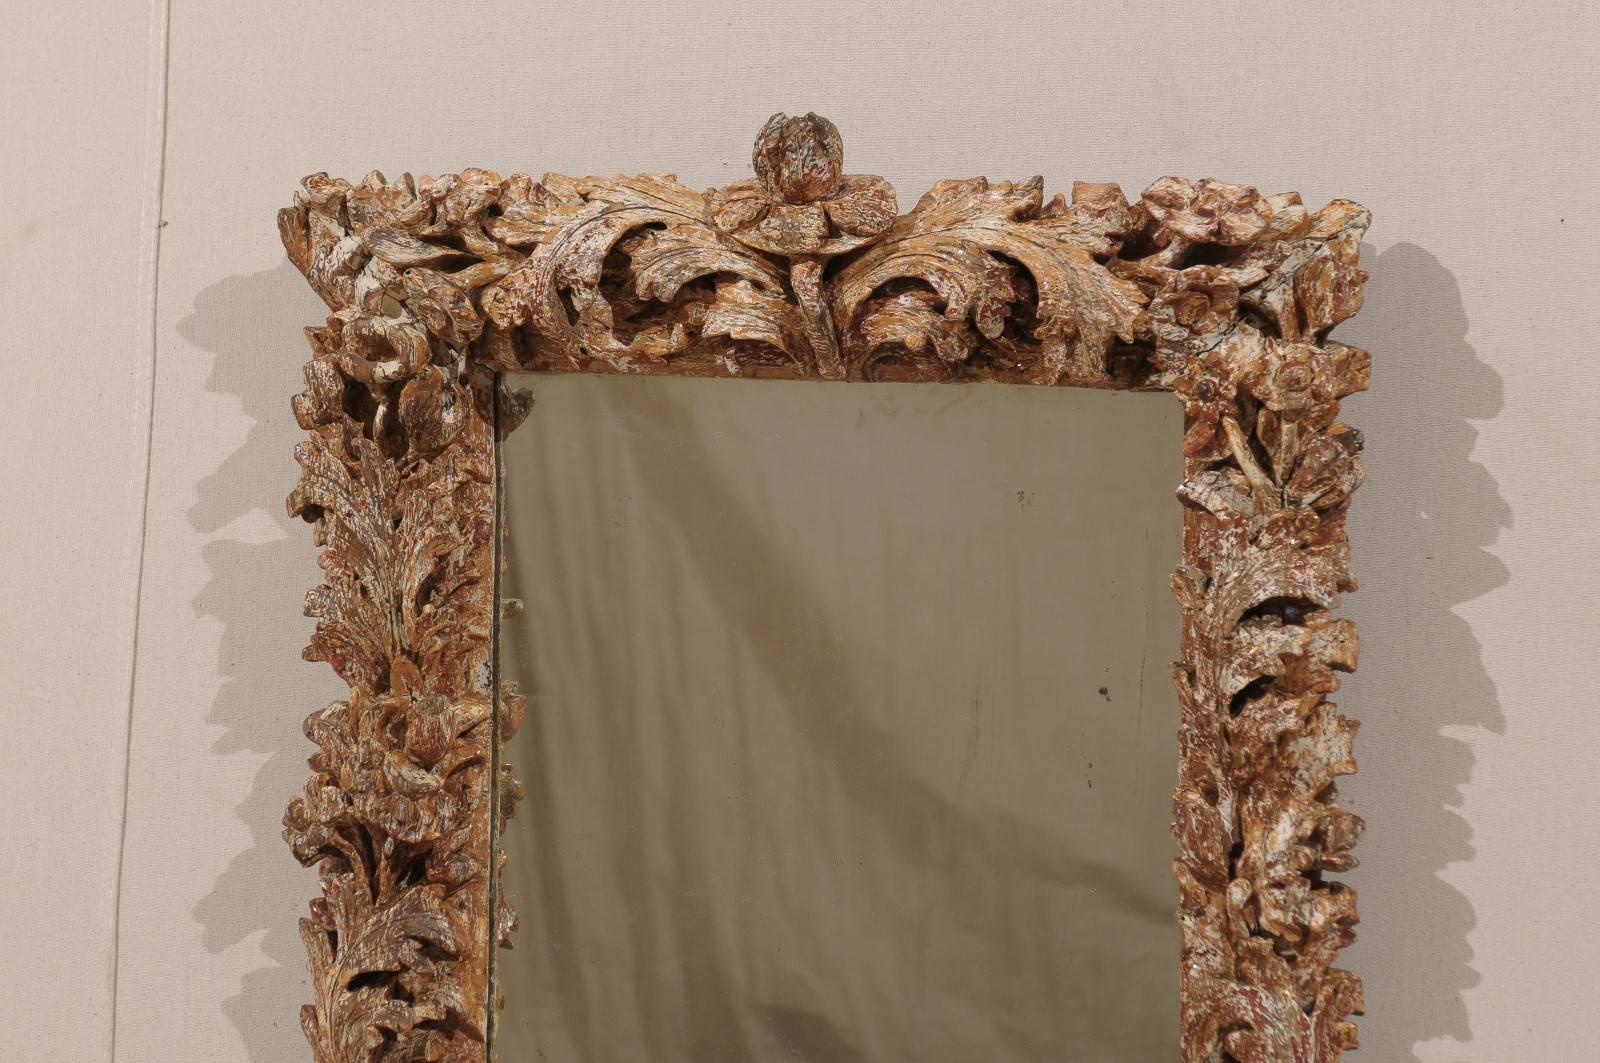 Painted Exquisite Italian Richly Carved Mirror with Foliage Motifs, 17th-18th Century